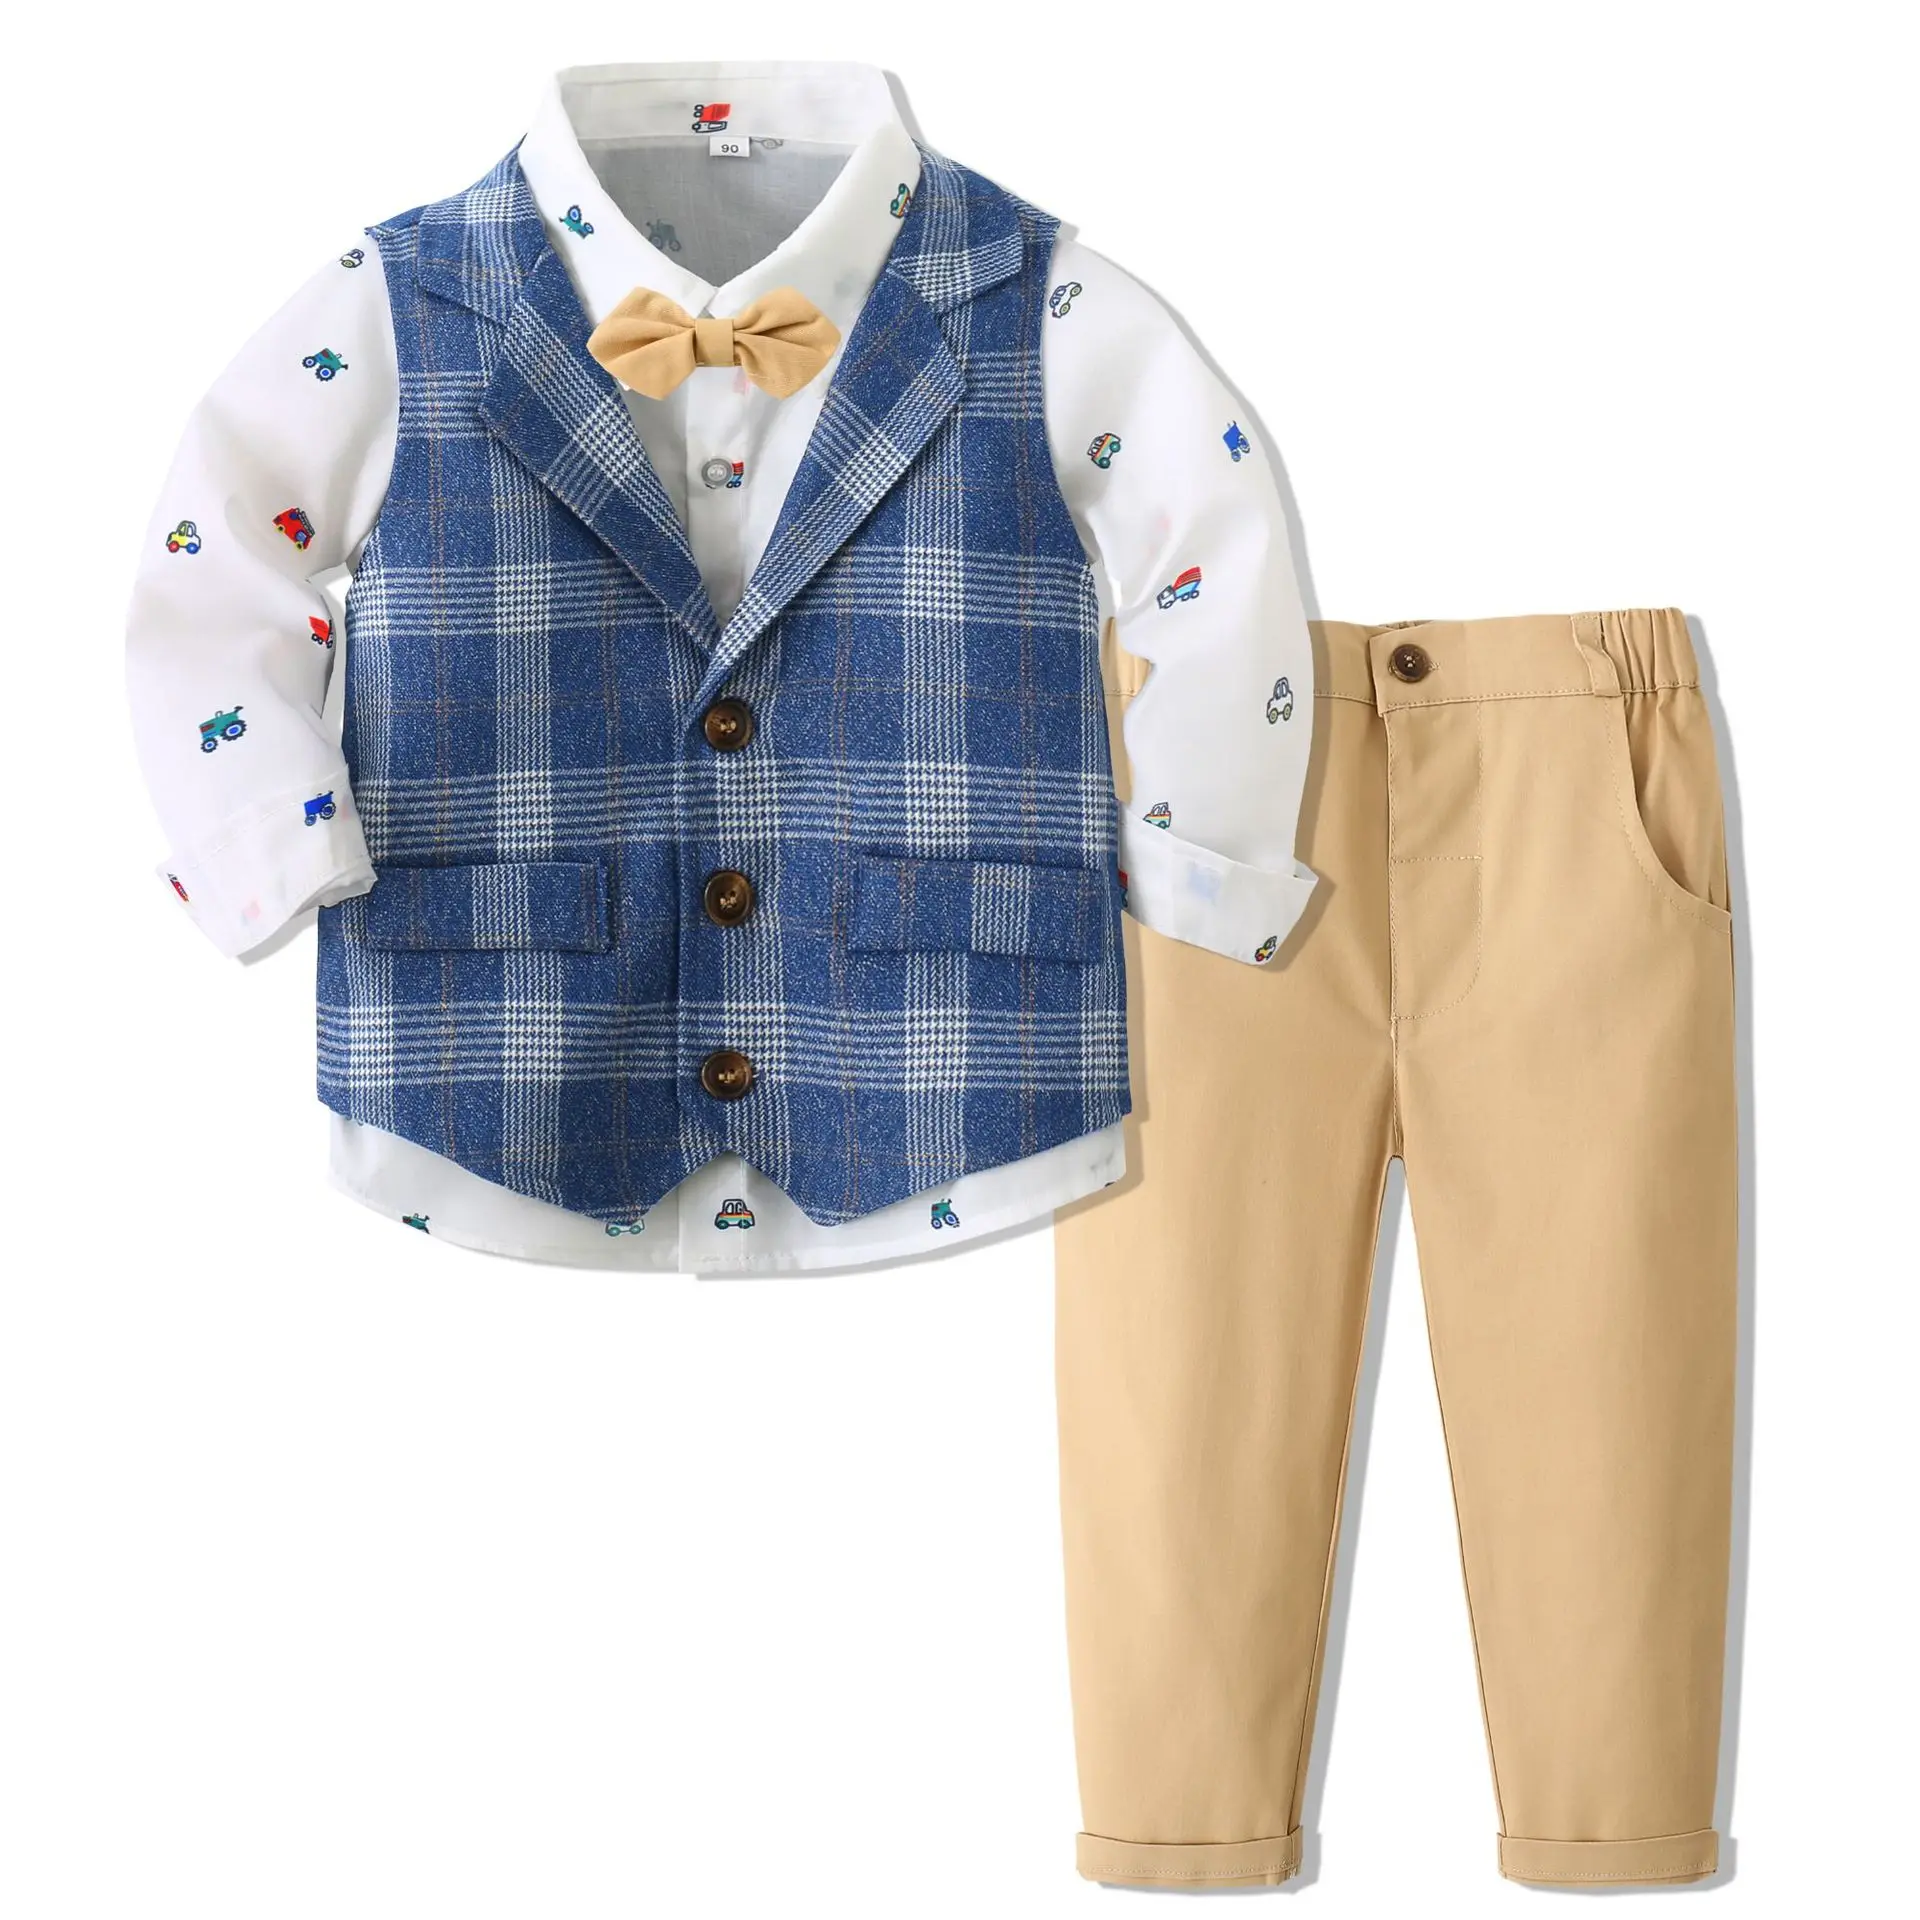 

1 2 3 4 5 Boys Luxury Boutique Set Spring Autumn Long Sleeve Birthday Outfit Plaid Vest with Car Printed Shirt Kid Daily Clothes